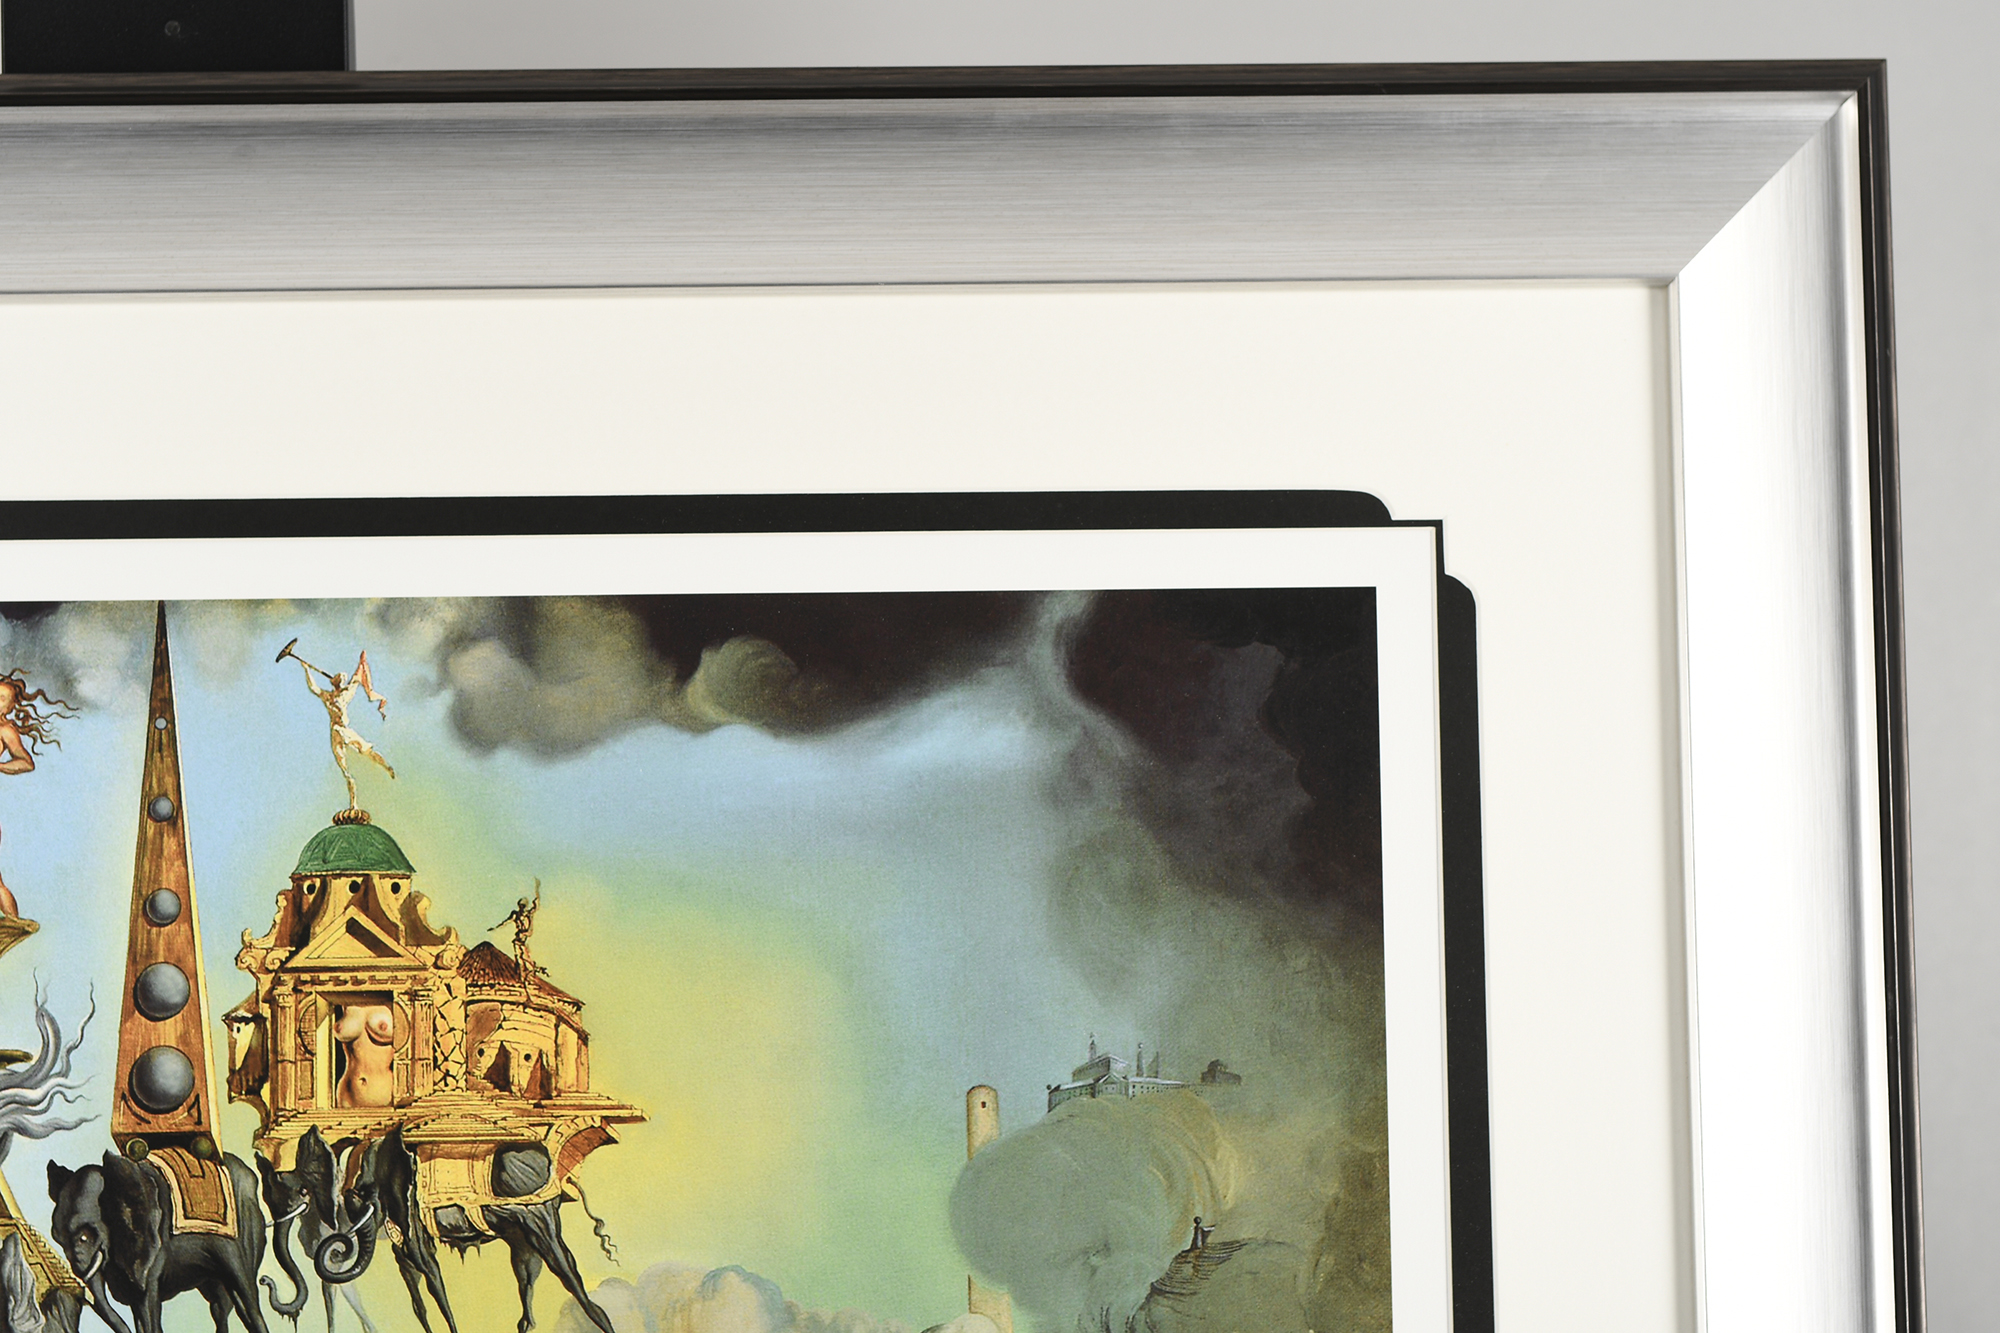 Salvador Dali Limited Edition "The Temptation of St. Anthony, 1942" - Image 2 of 10